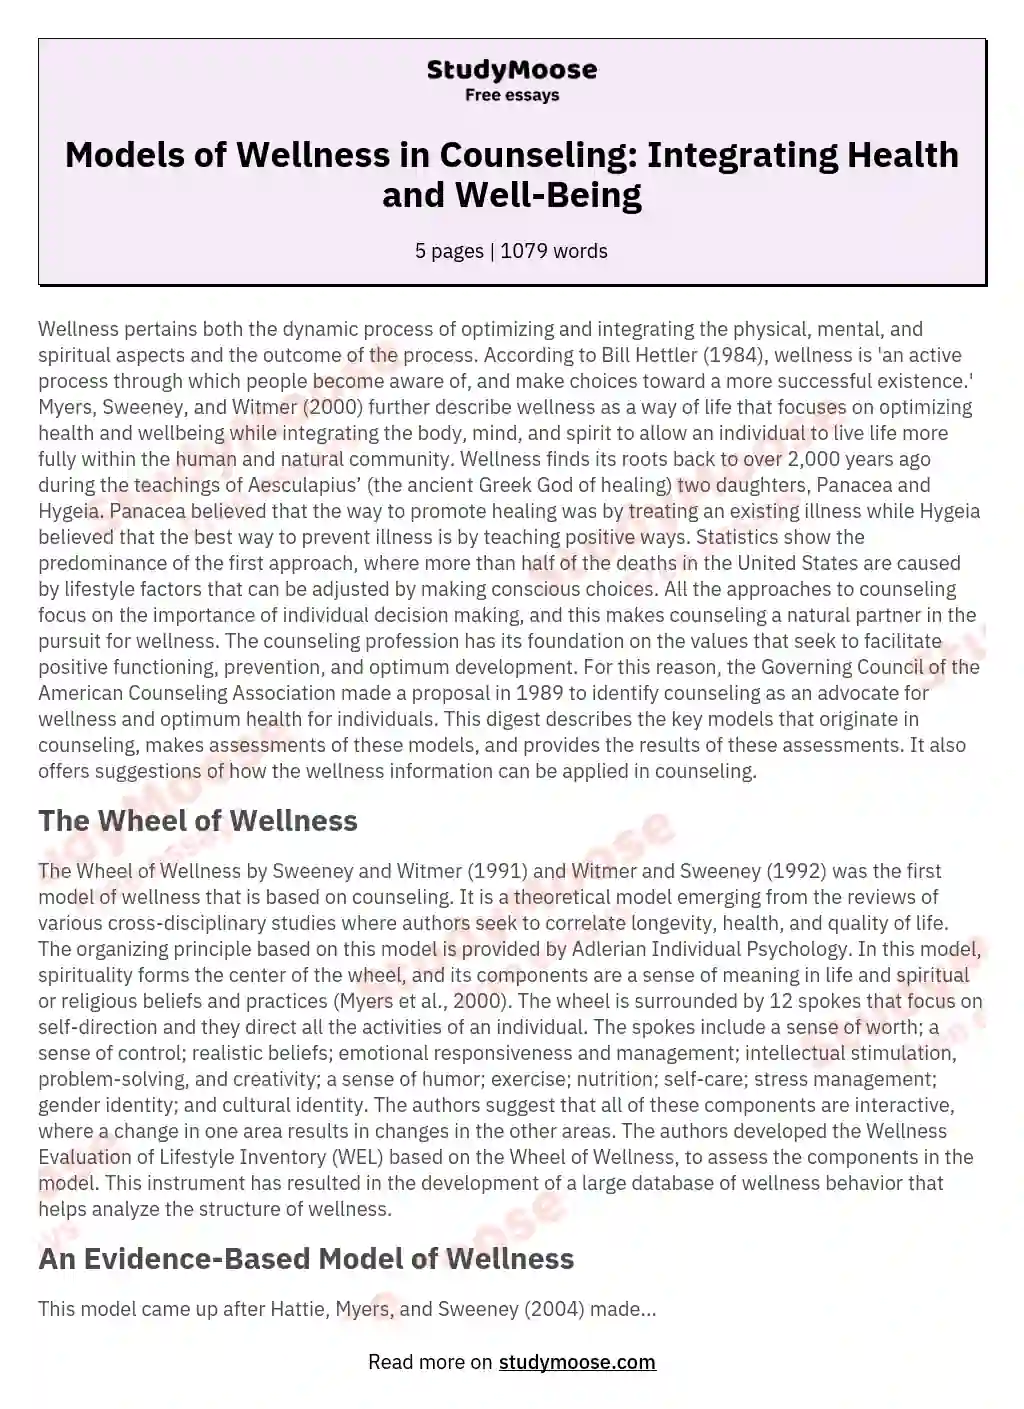 Models of Wellness in Counseling: Integrating Health and Well-Being essay